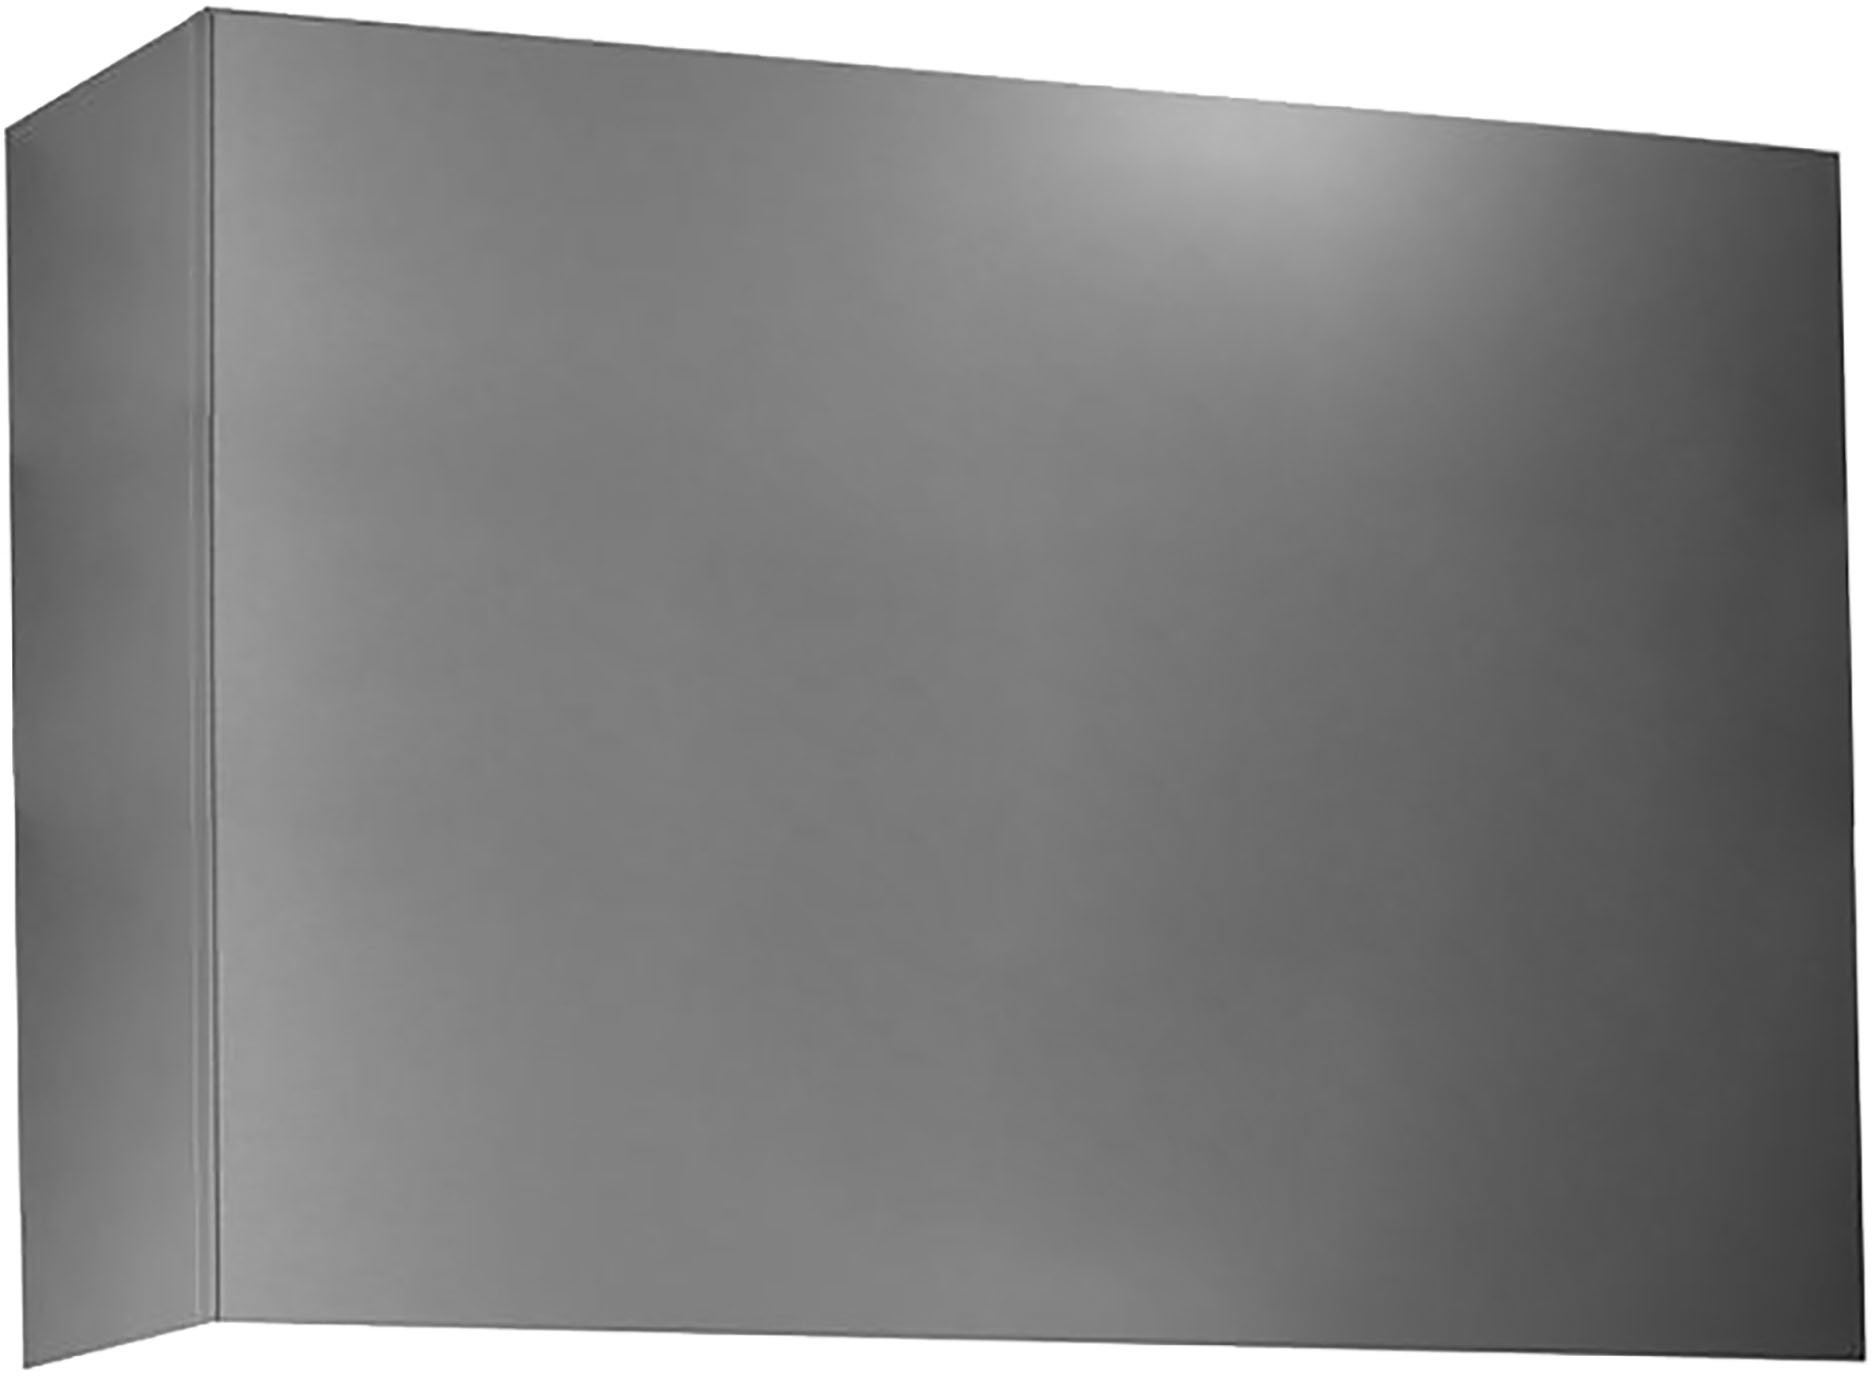 Angle View: Fisher & Paykel - Vertical Duct Cover - Stainless Steel